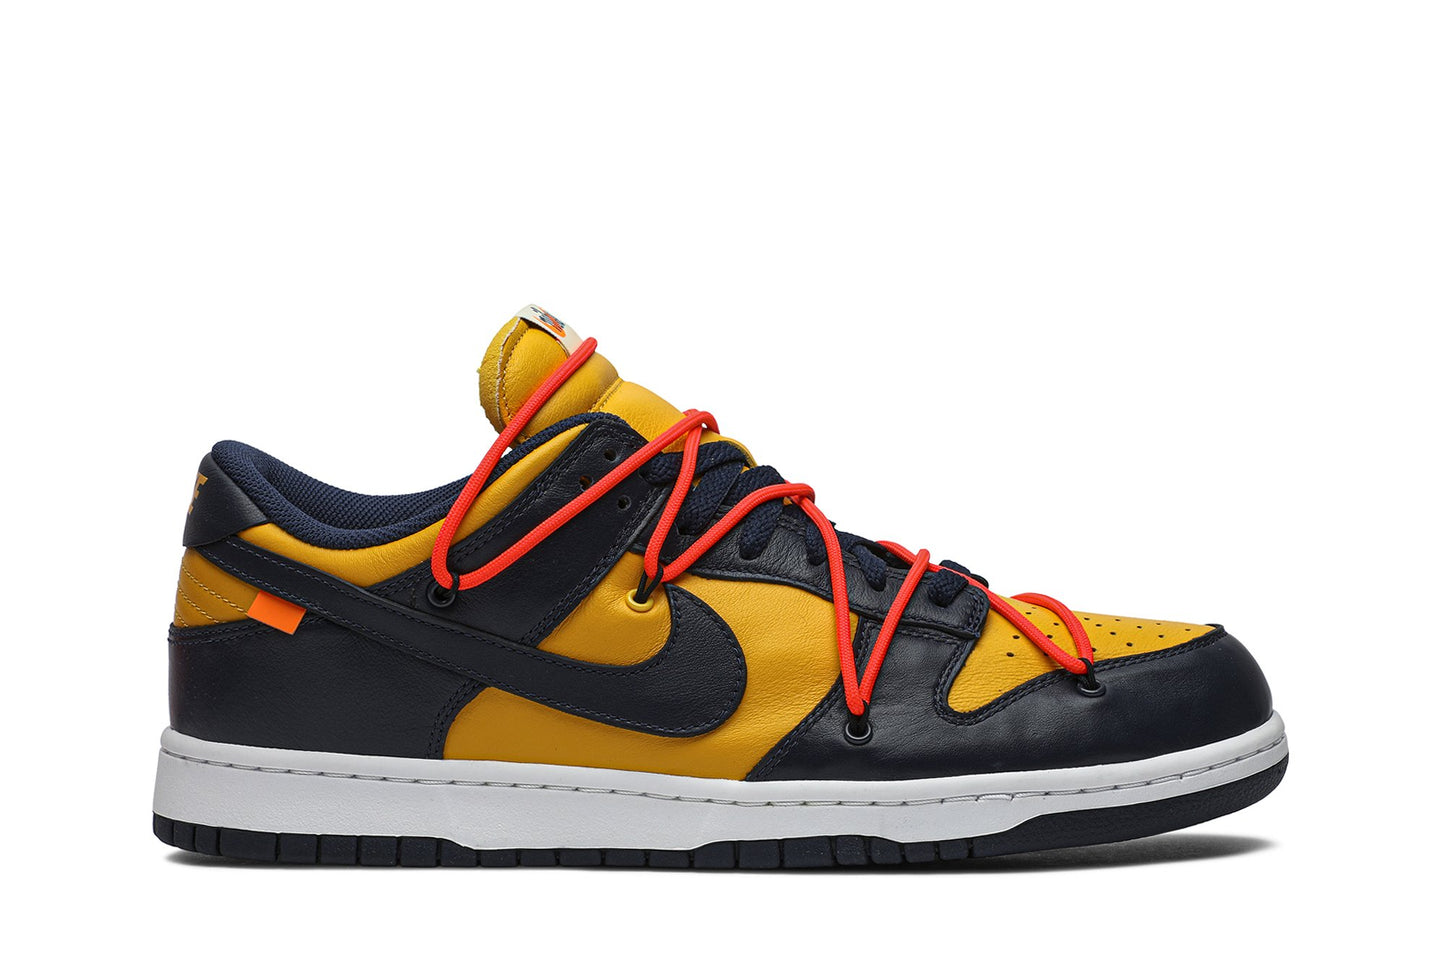 Off-White x Dunk Low 'University Gold' CT0856-700